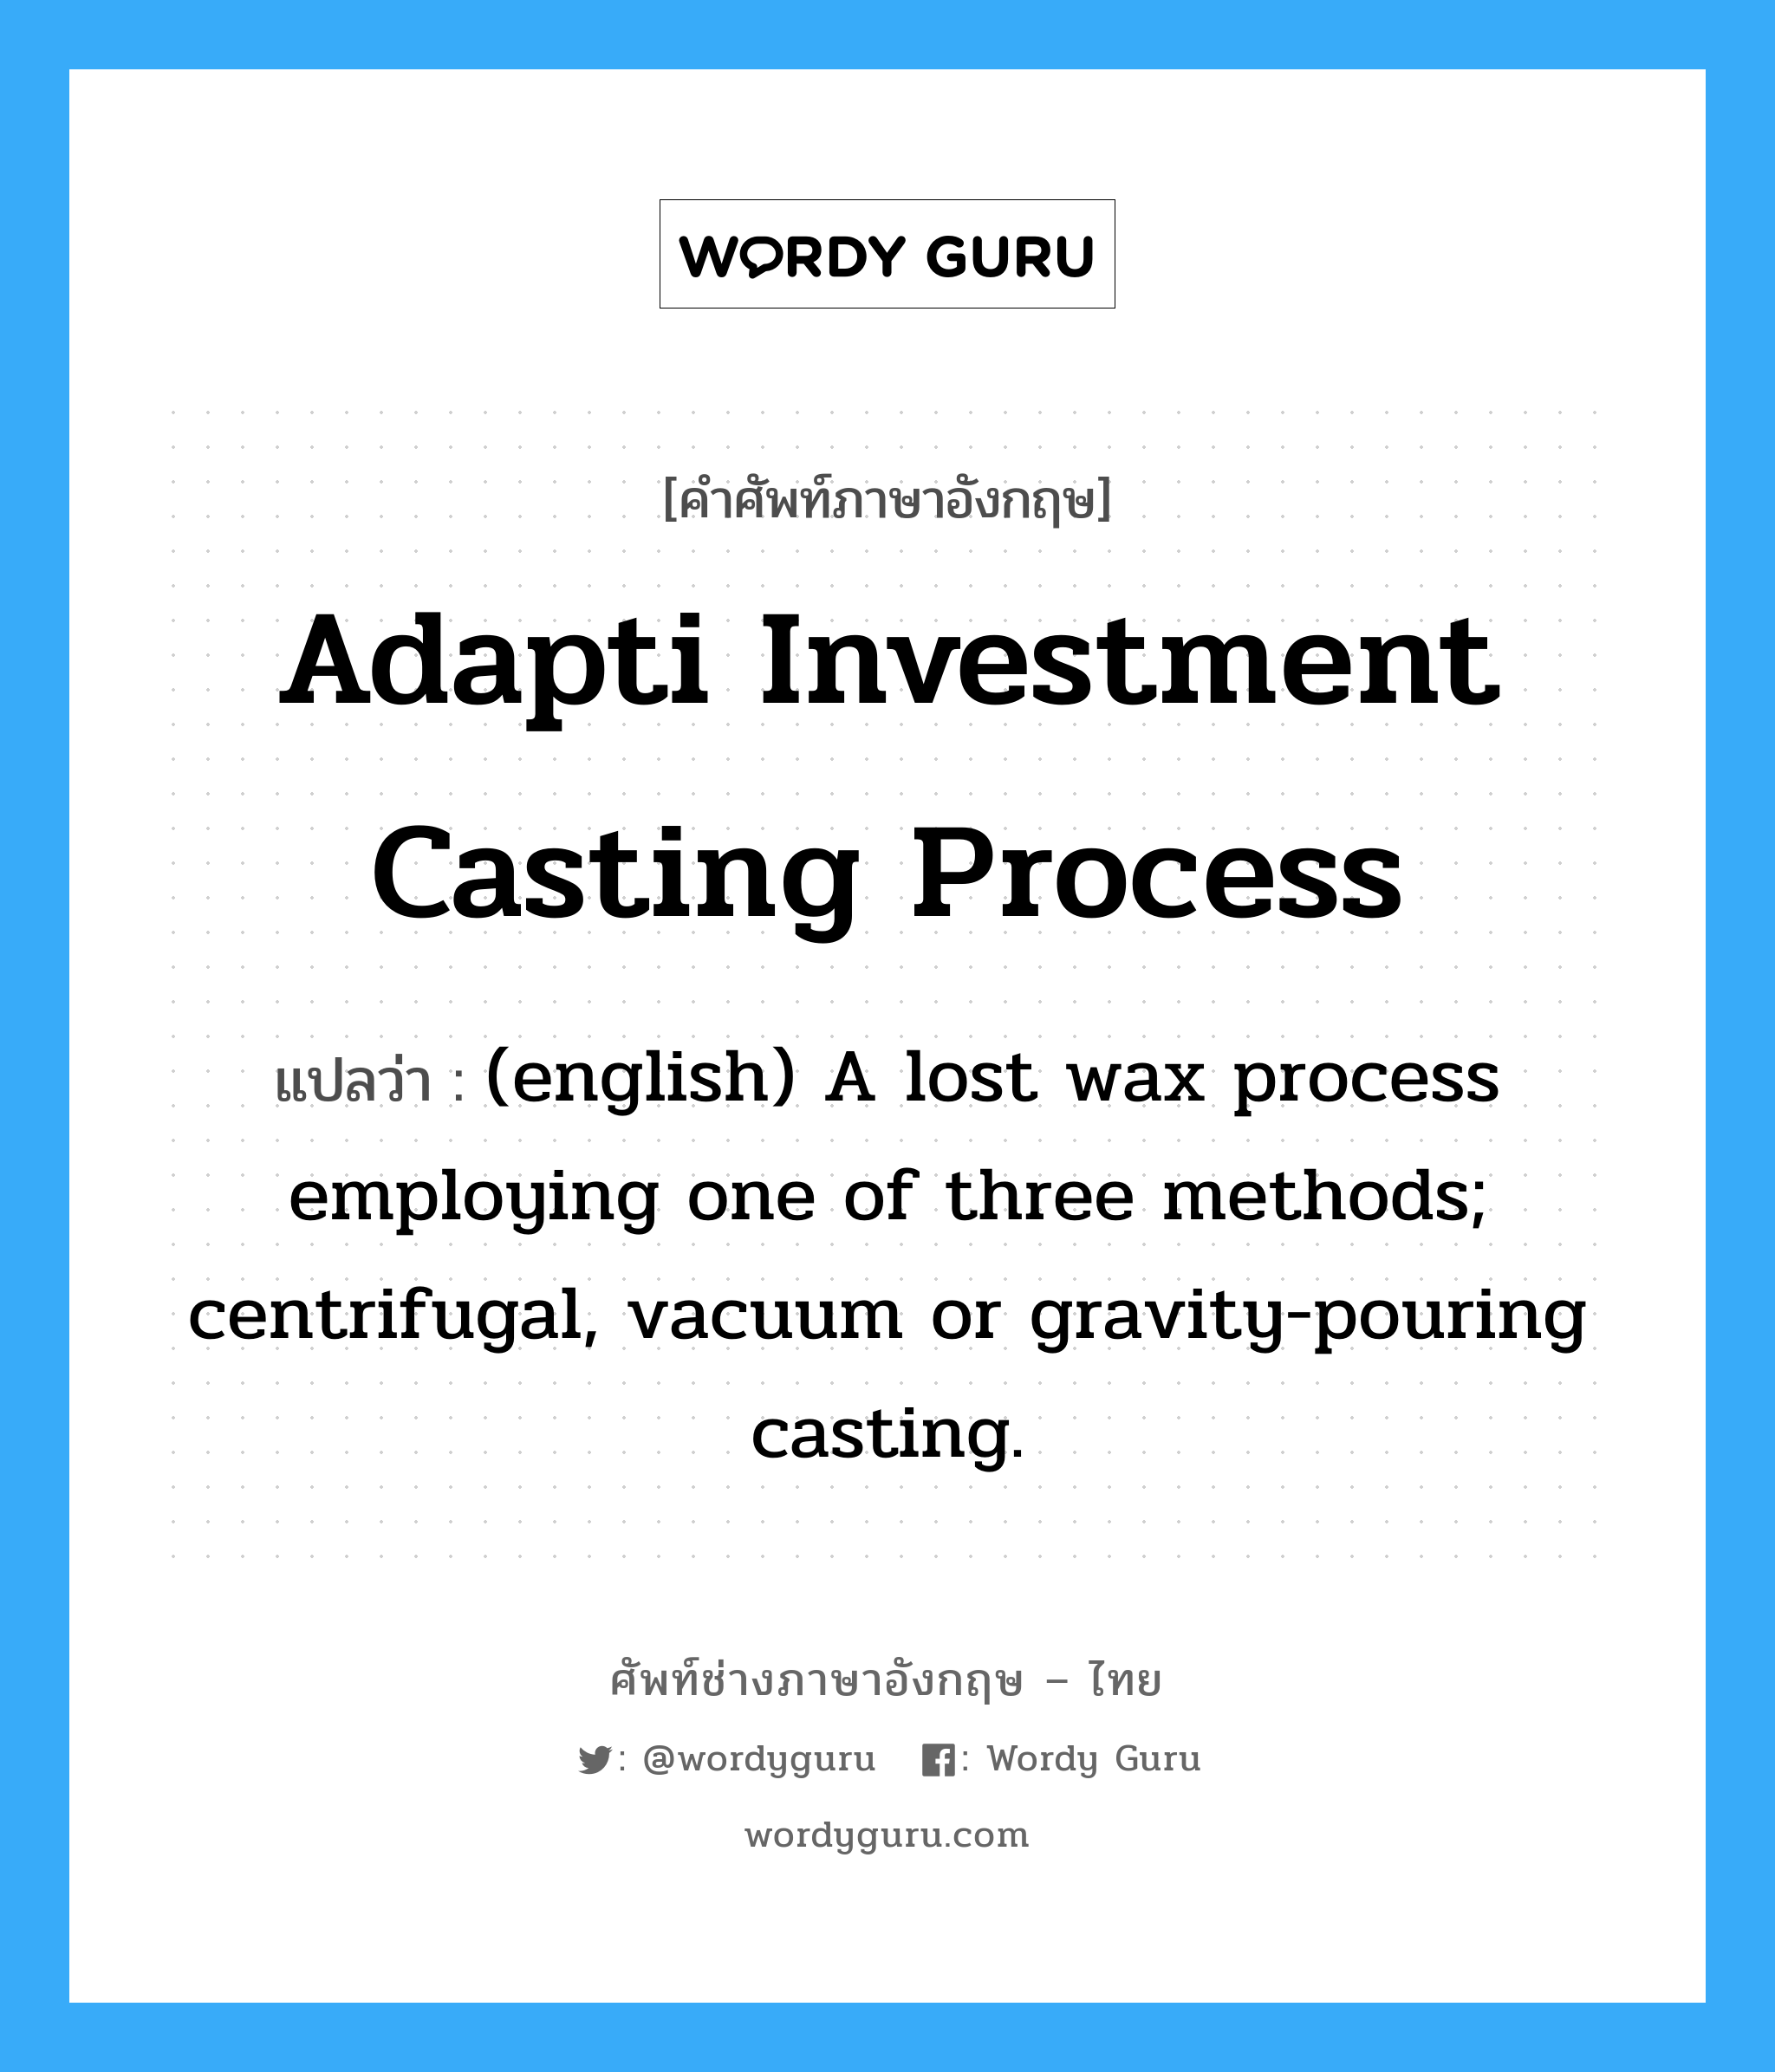 (english) A lost wax process employing one of three methods; centrifugal, vacuum or gravity-pouring casting. ภาษาอังกฤษ?, คำศัพท์ช่างภาษาอังกฤษ - ไทย (english) A lost wax process employing one of three methods; centrifugal, vacuum or gravity-pouring casting. คำศัพท์ภาษาอังกฤษ (english) A lost wax process employing one of three methods; centrifugal, vacuum or gravity-pouring casting. แปลว่า Adapti Investment Casting Process